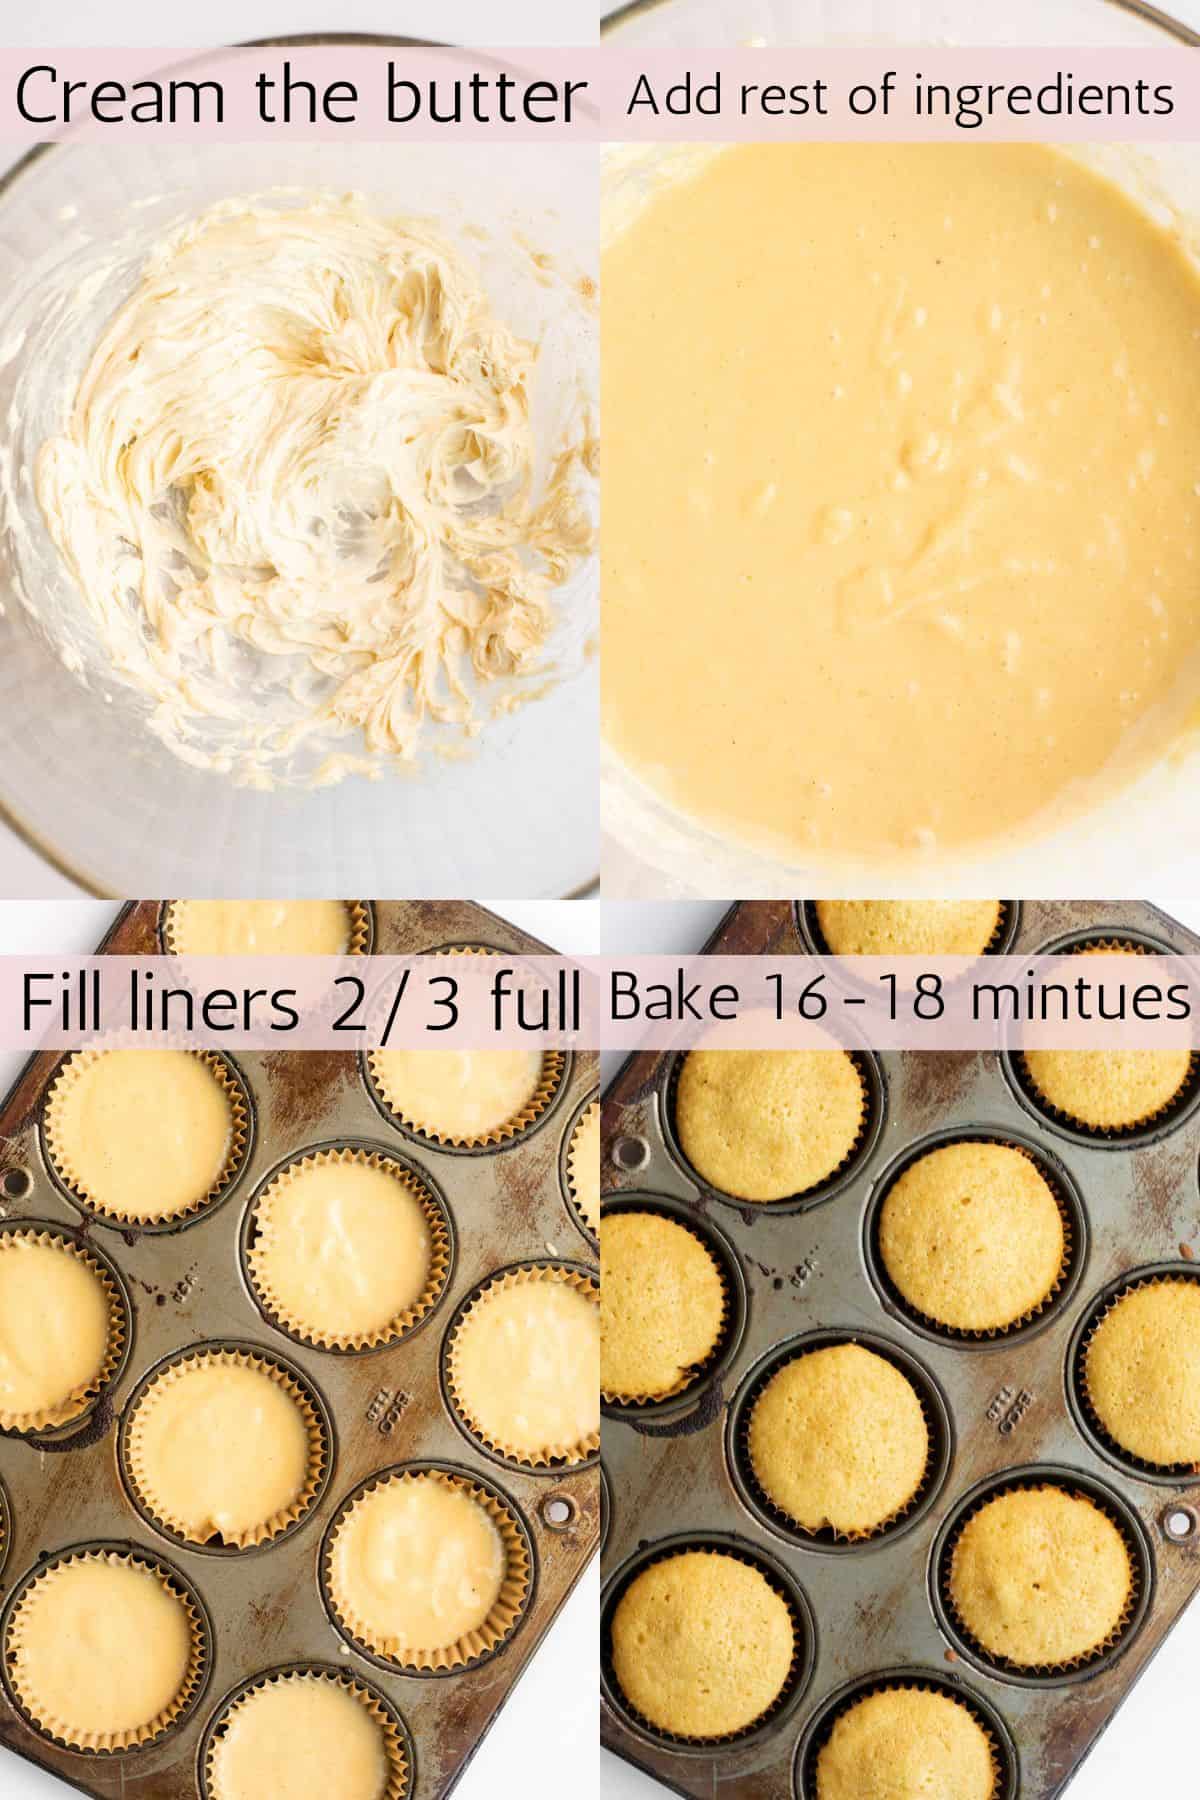 step by step instructions for baking cupcakes without dairy